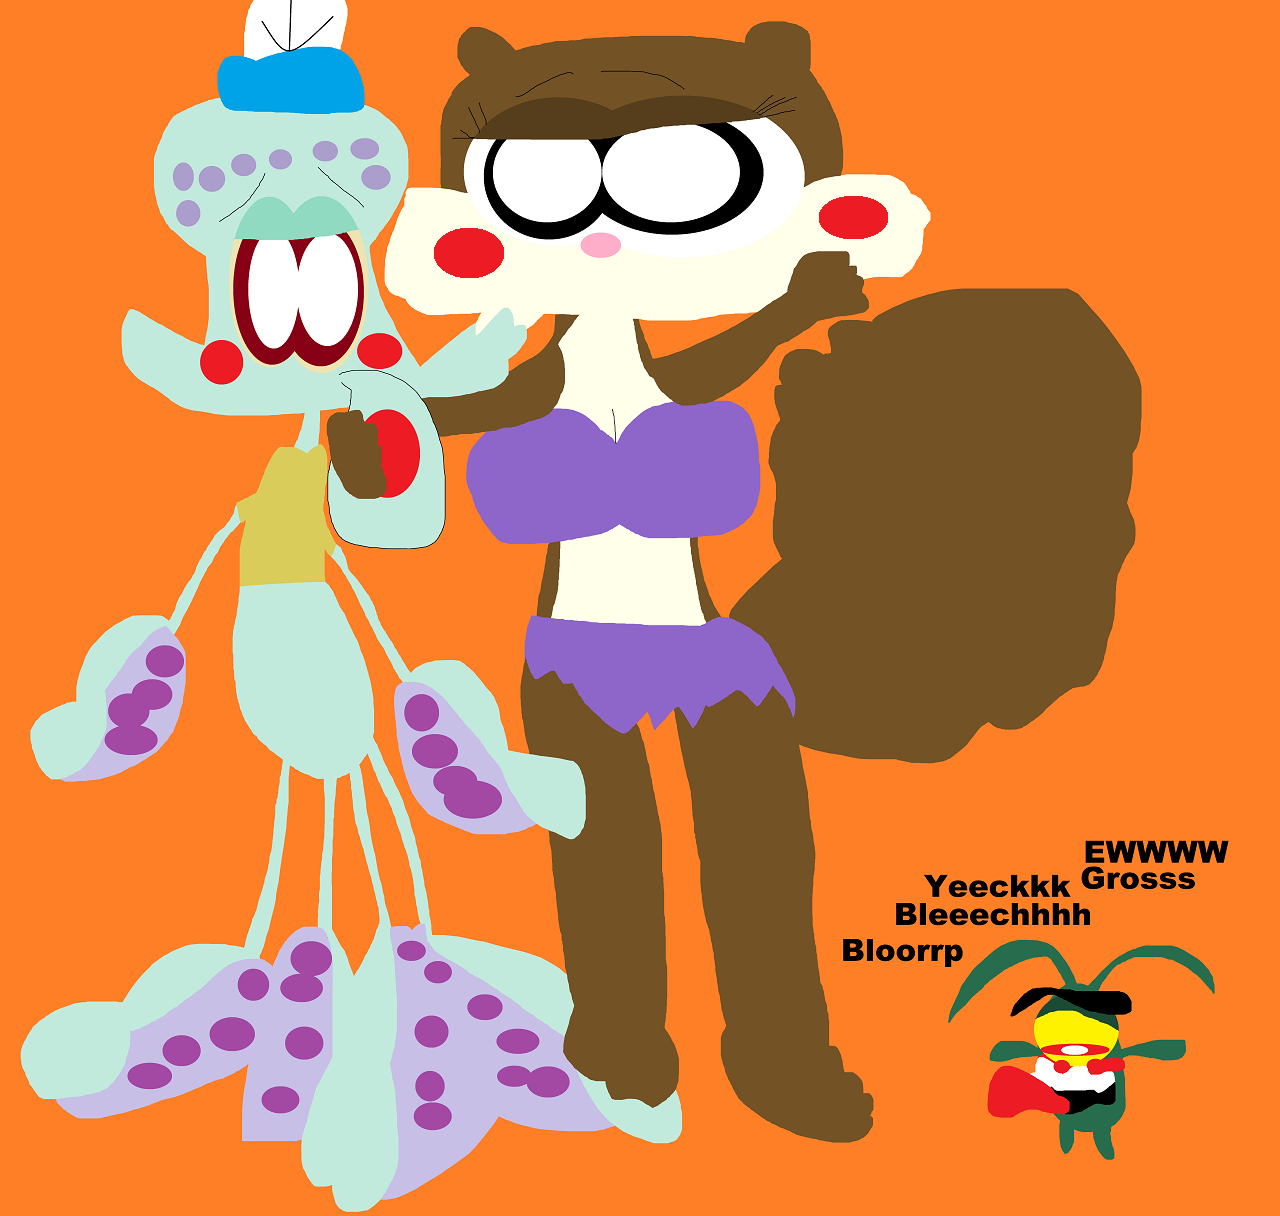 Plankton Channeling His Inner Calvin While Squidward And Sandy Kiss by Falconlobo